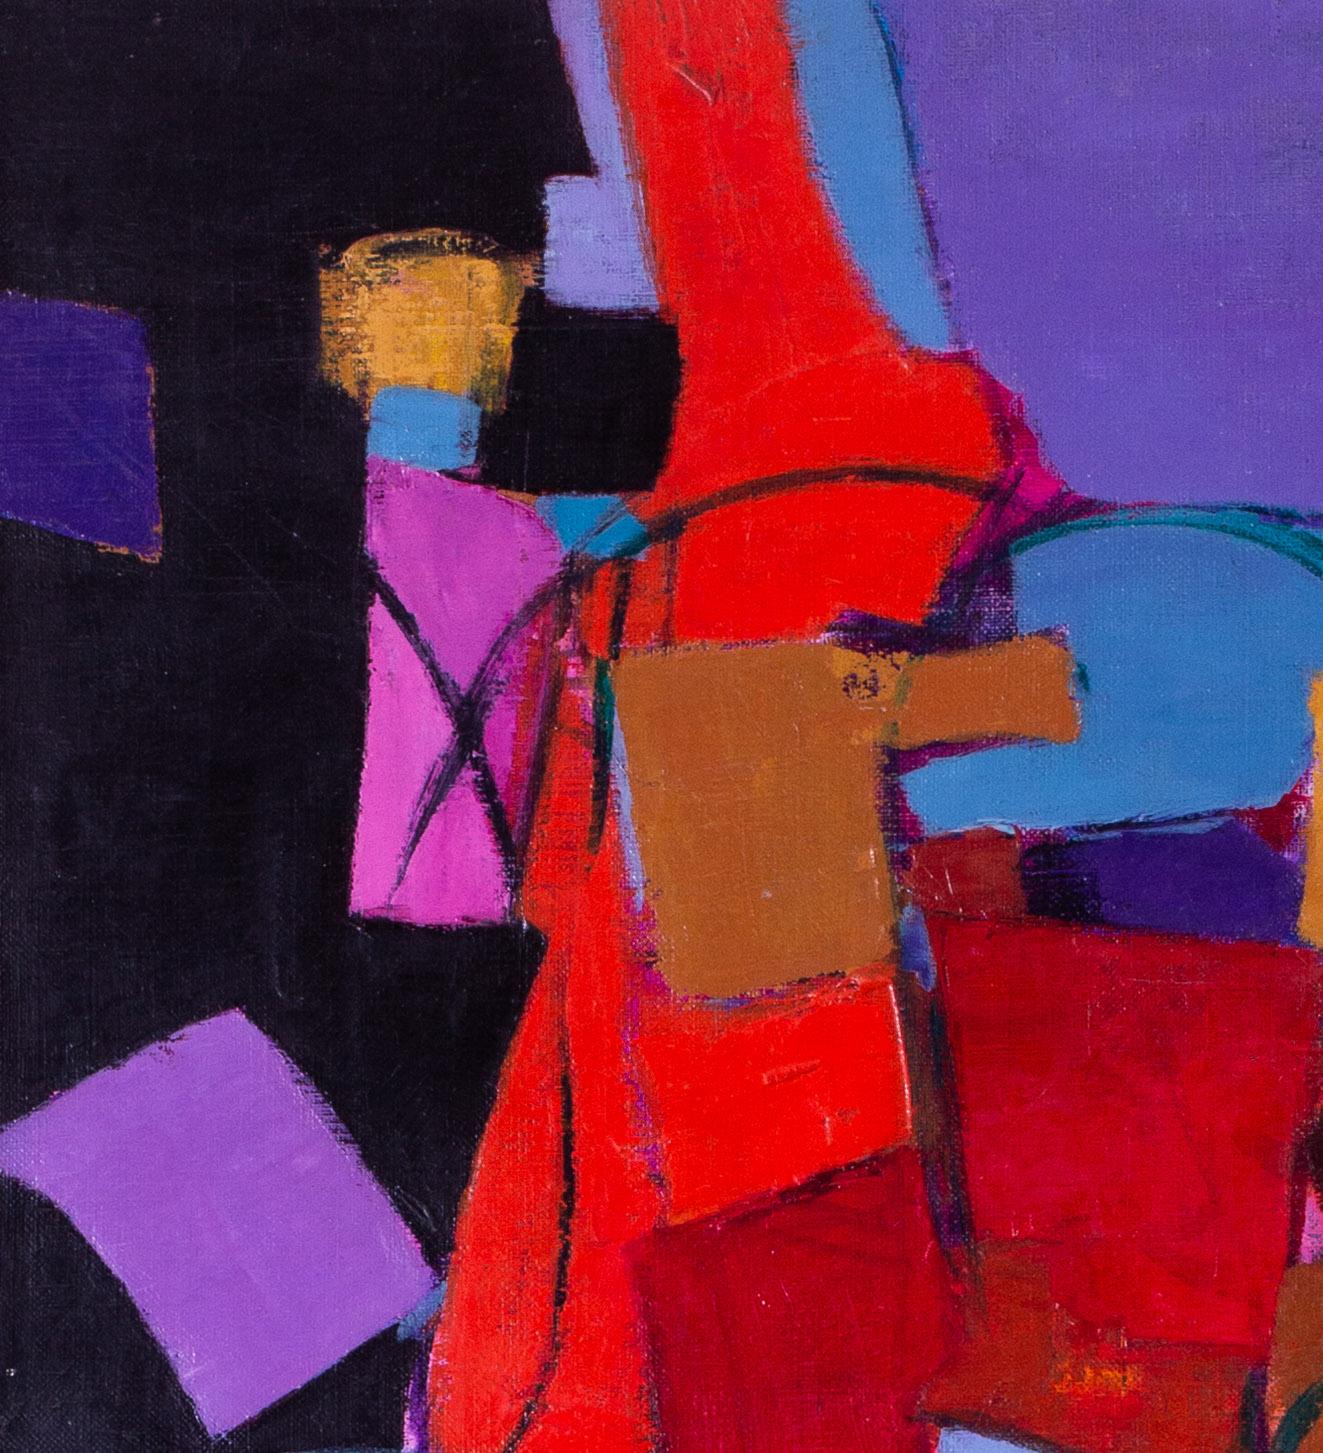 French 20th Century abstract with blocks of reds, blues and purples - Painting by Denise Bourdouxhe 